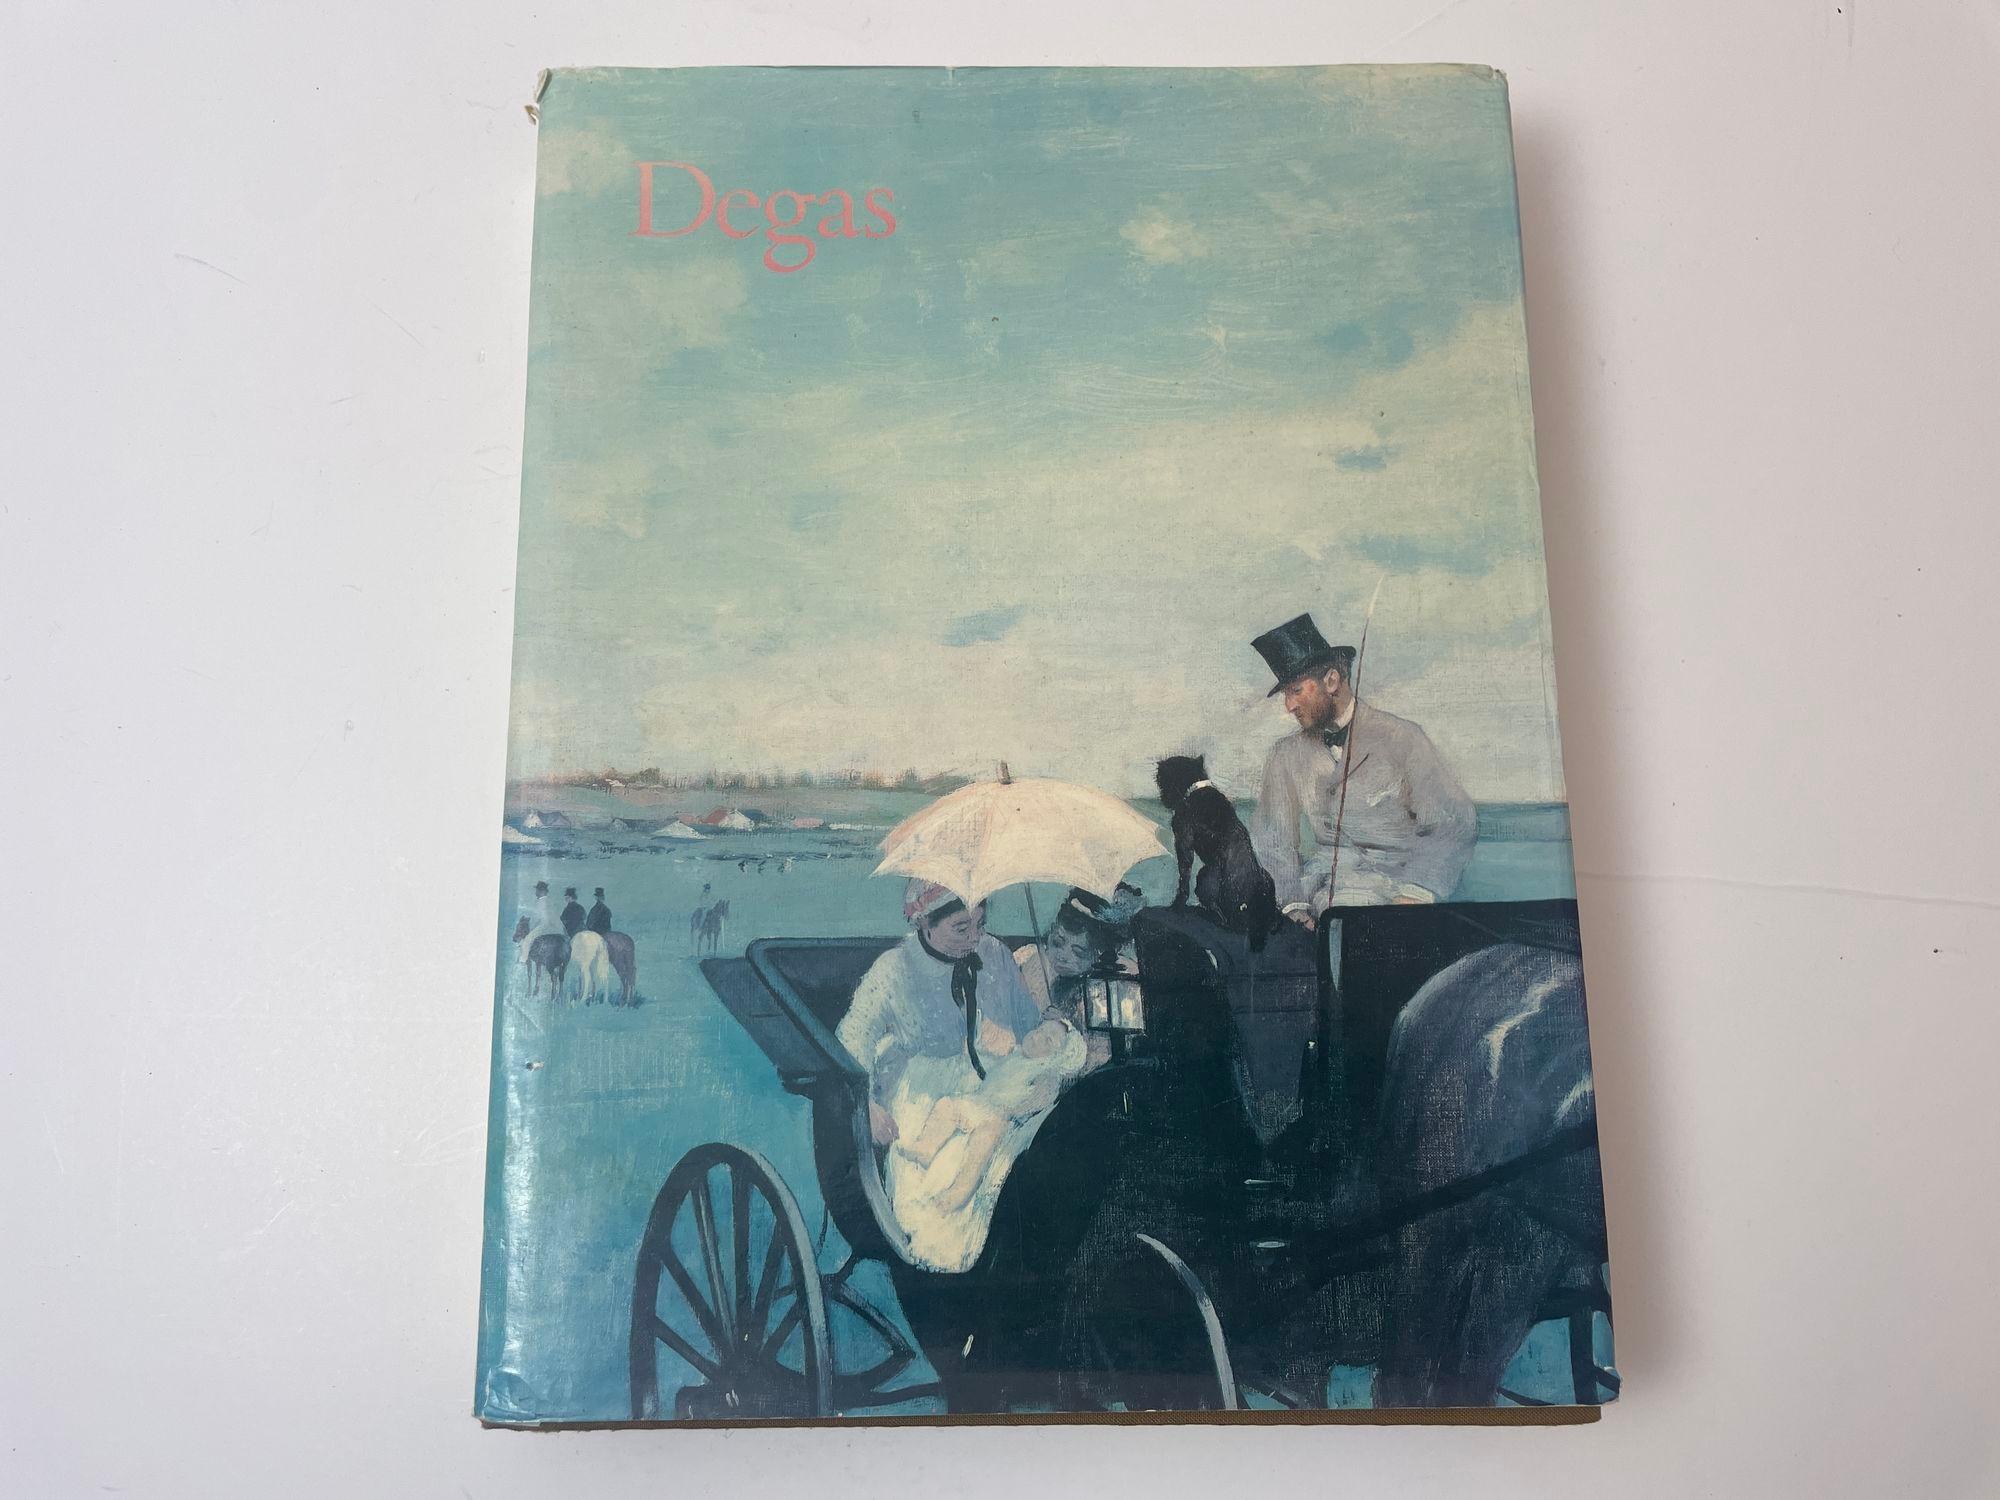 Degas by Jean Sutherland Boggs Hardcover Book Met Museum of Art 1st Ed. 1988.
Edgar Degas was a French Impressionist artist famous for his pastel drawings and oil paintings.
Degas also produced bronze sculptures, prints and drawings.
Degas is